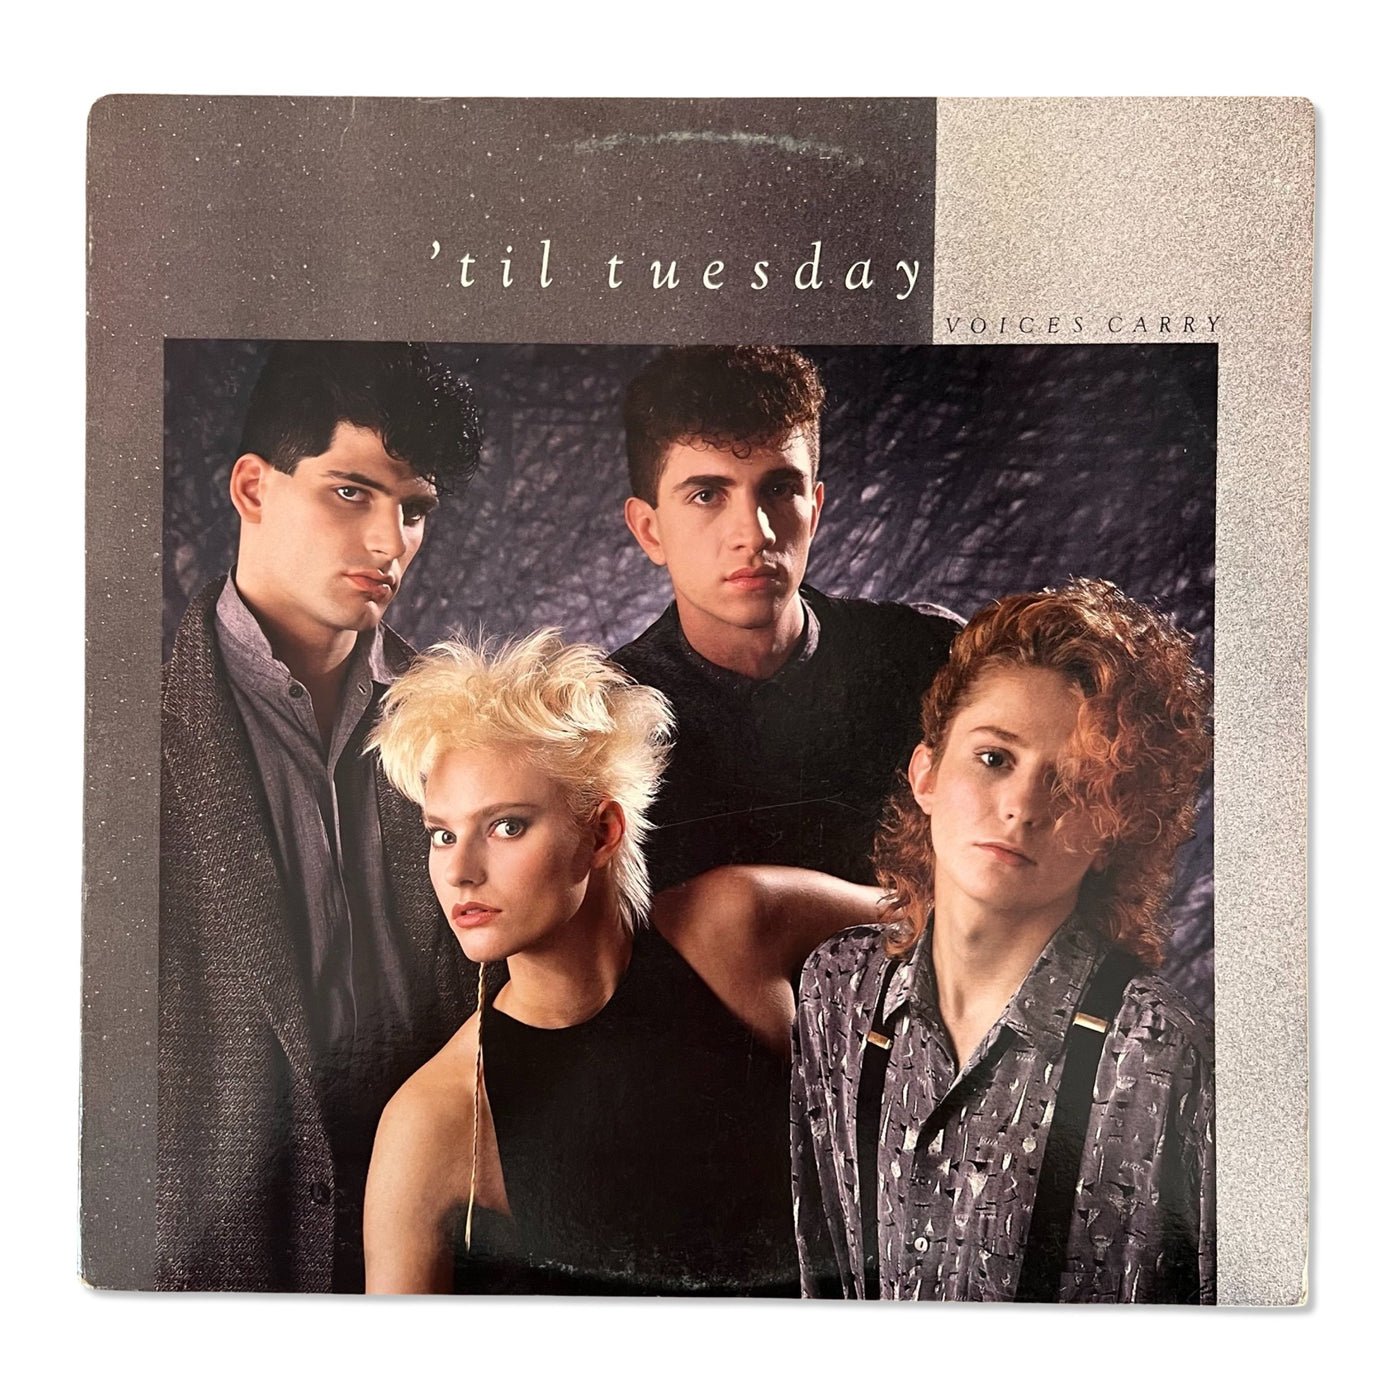 'Til Tuesday – Voices Carry